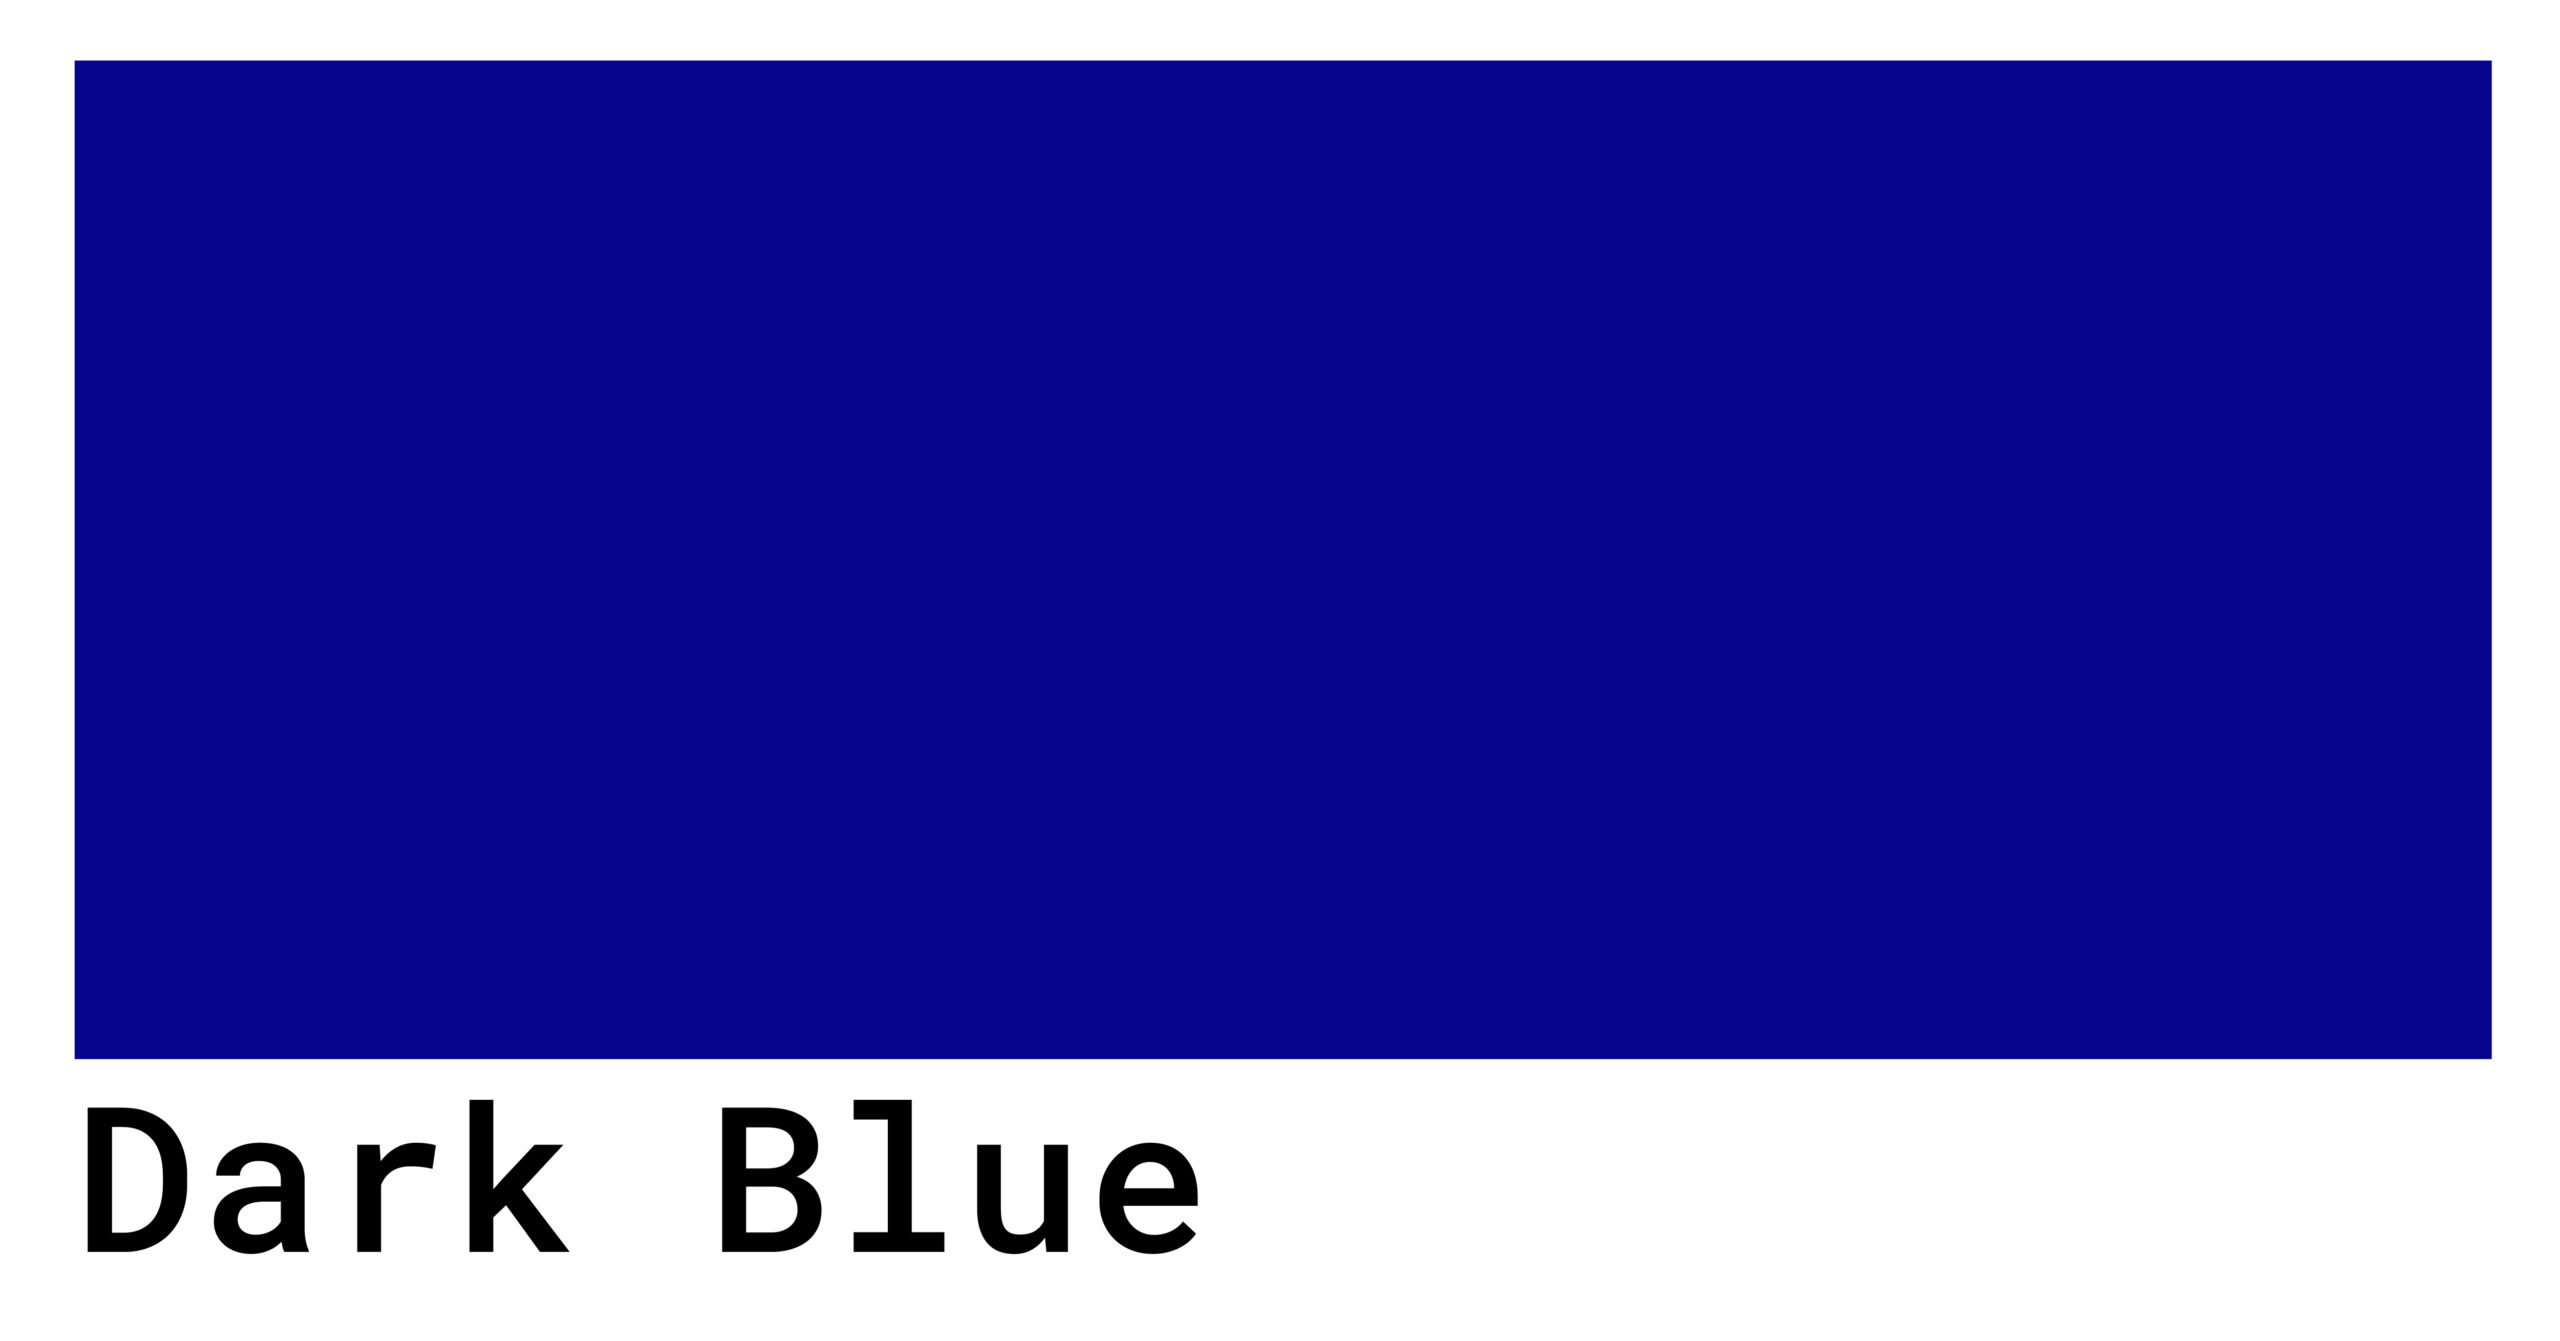 Dark Blue Color Codes - The Hex, RGB and CMYK Values That You Need